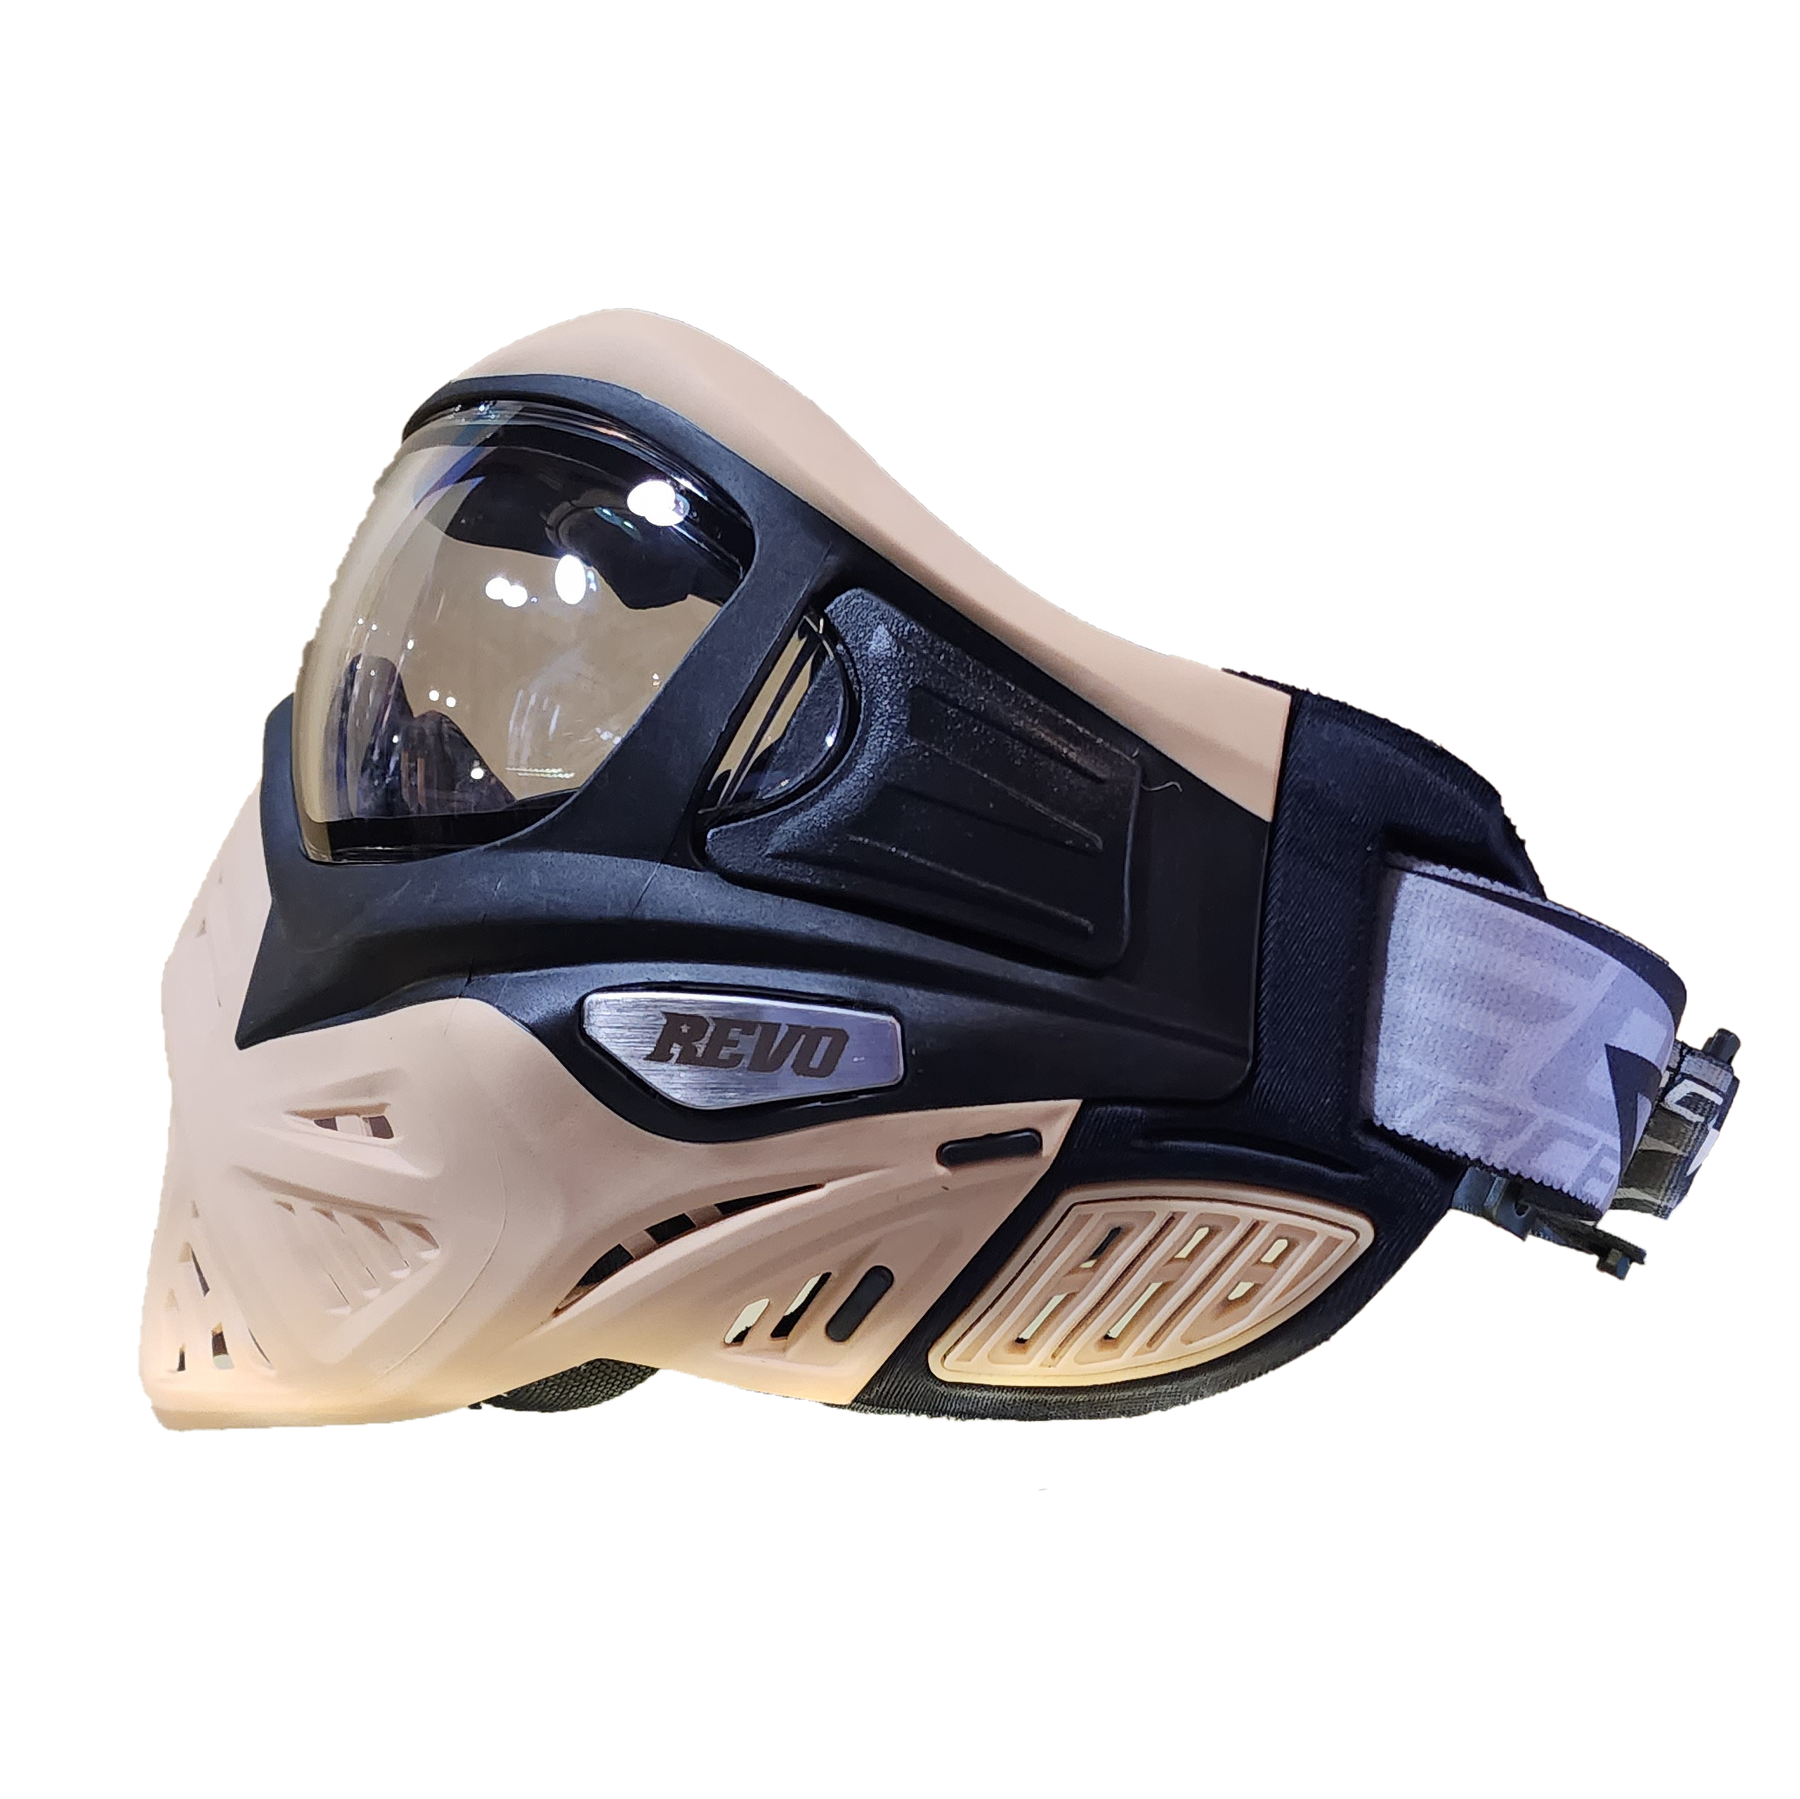 Vforce Grill 2.0 Limited Edition Tan/Black Revo Paintball Mask